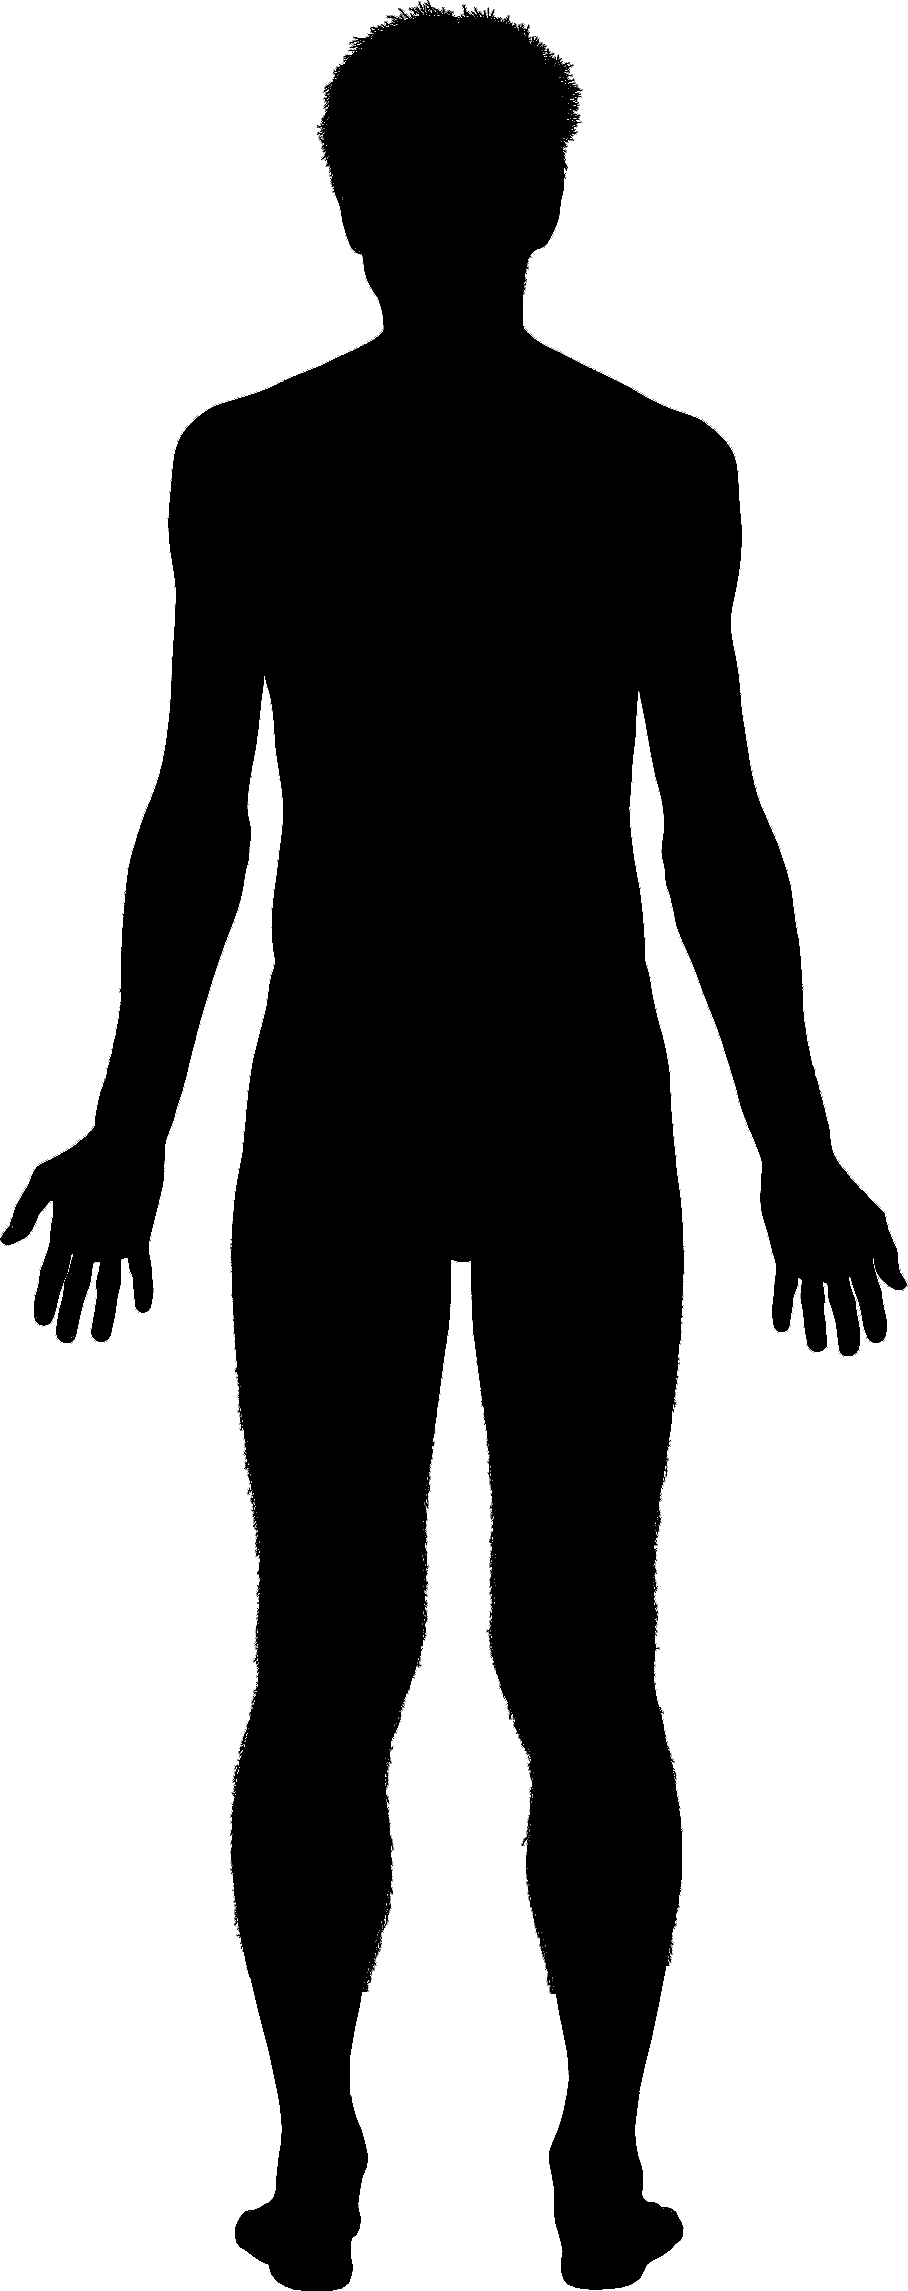 clipart human being - photo #16